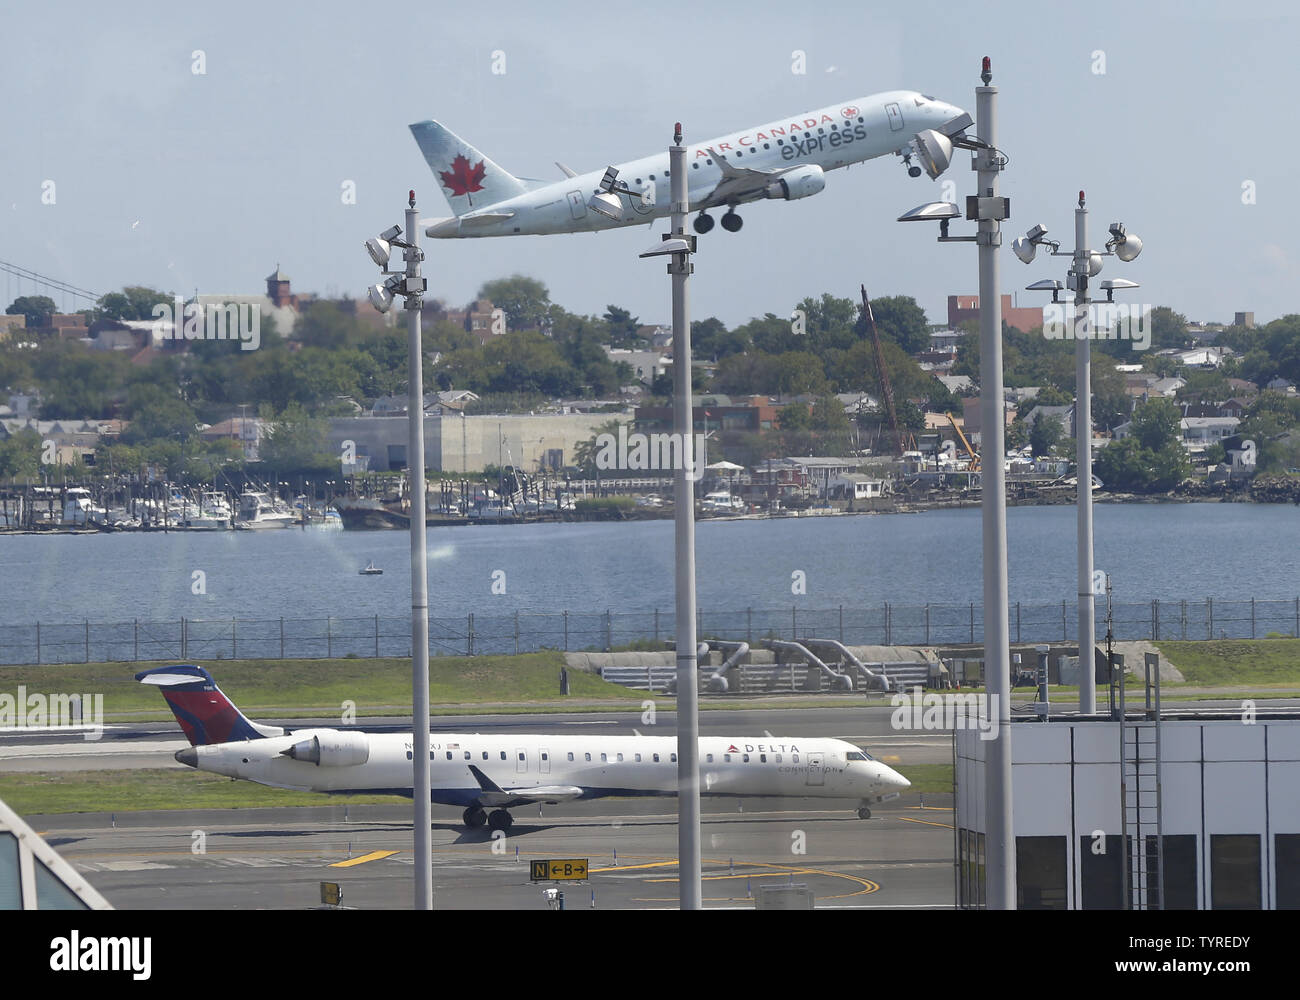 An Air Canada plane takes off over a Delta Airlines plane that remains on the runway at LaGuardia Airport in New York City on August 8, 2016 in New York City. Delta began to resume flights but still expect massive cancelations and delays after after a computer glitch shut down the airline completely this morning.    Photo by John Angelillo/UPI Stock Photo